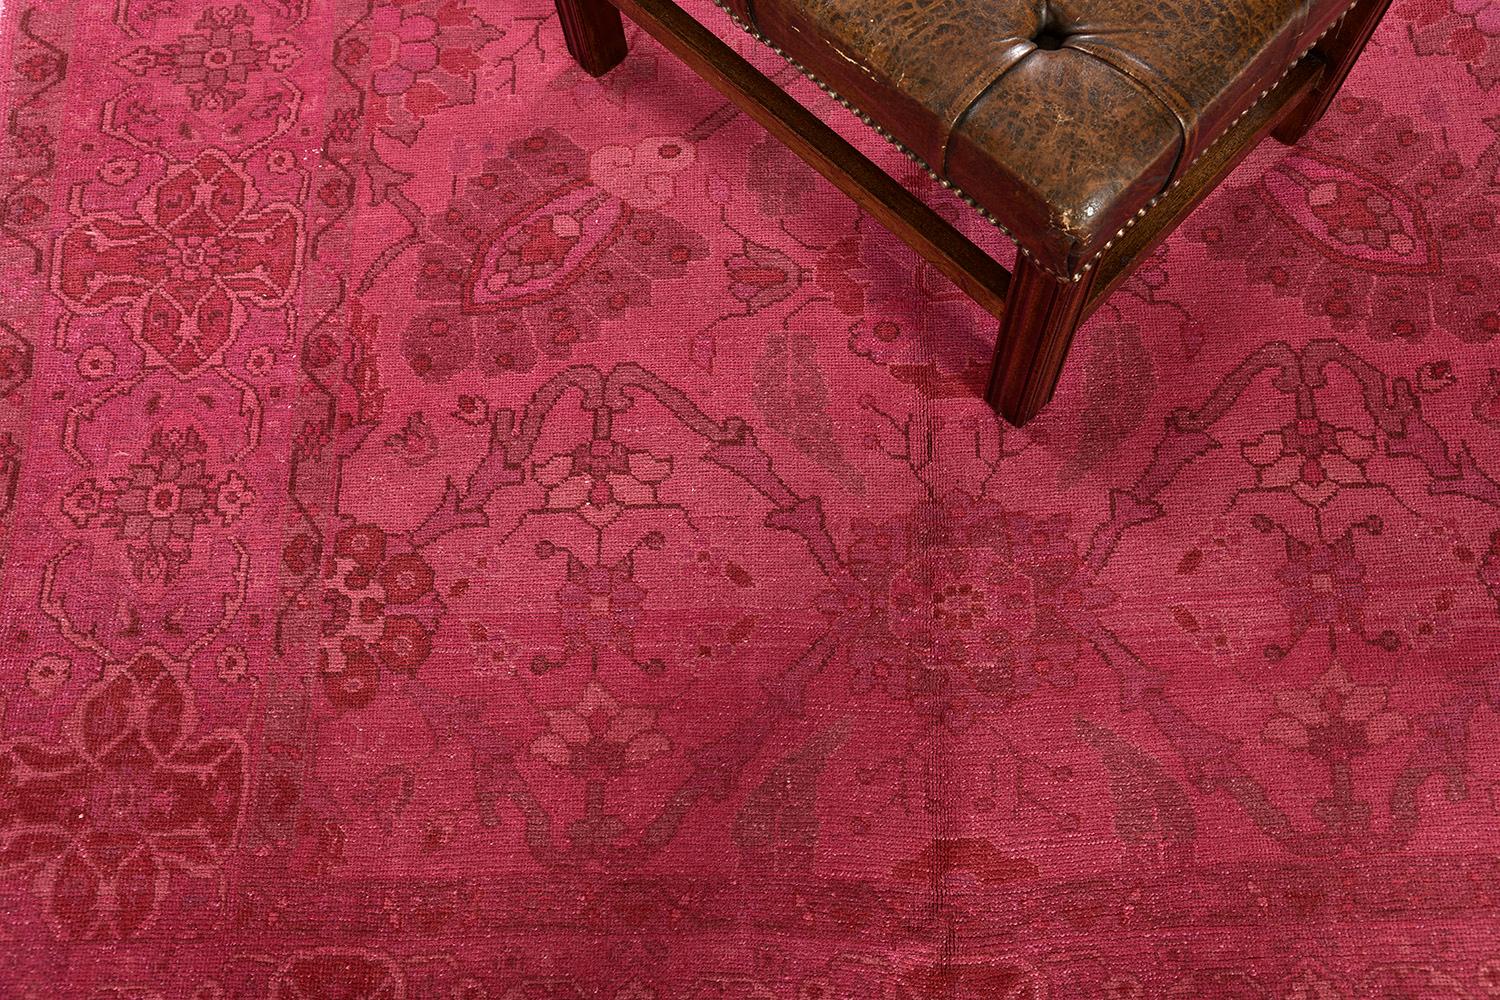 This magenta-overdyed vintage rug is an instant master work of art. With its understated design and style, this woven piece of art exudes elegance from every thread. The wool is soft and supple, but durable to last a lifetime. A decor that would be